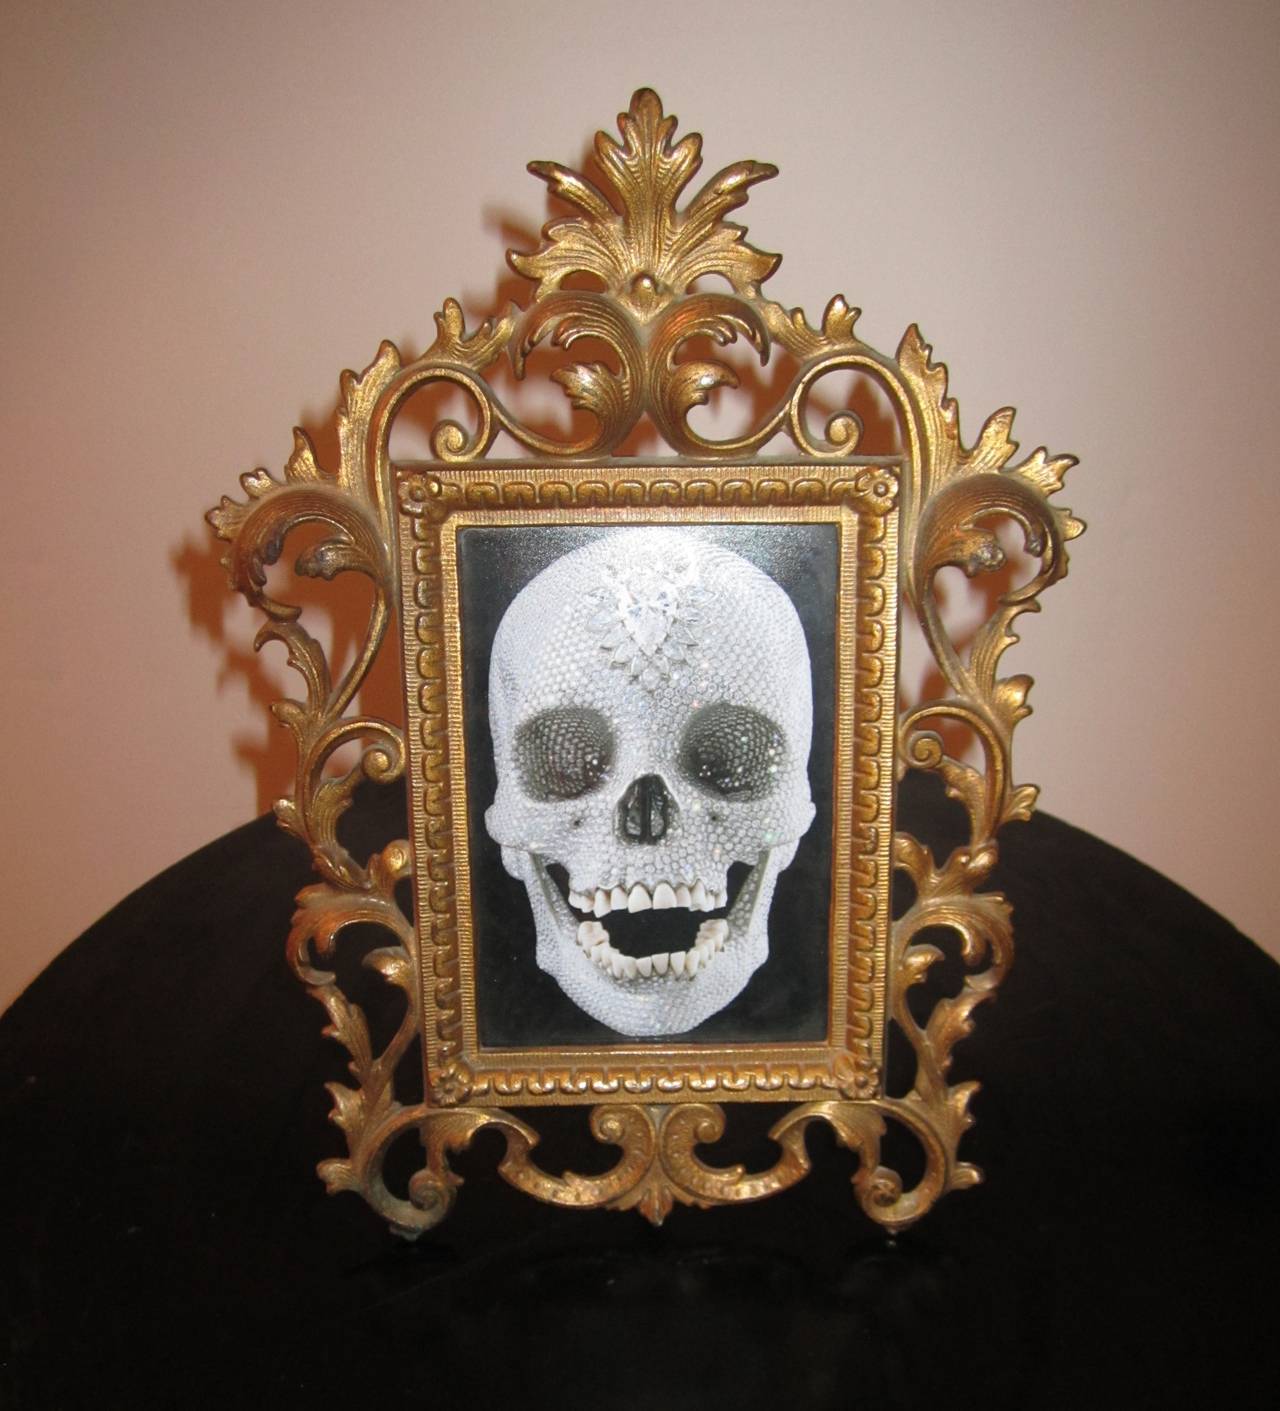 Stunning antique Victorian brass picture frame, circa 1900s. Frame shown with C-print black and white image of 'For the love of god' by Damien Hirst (image, circa 2007.) Frame measures 12 in. x 9 in. 

Item available here online. By request, item